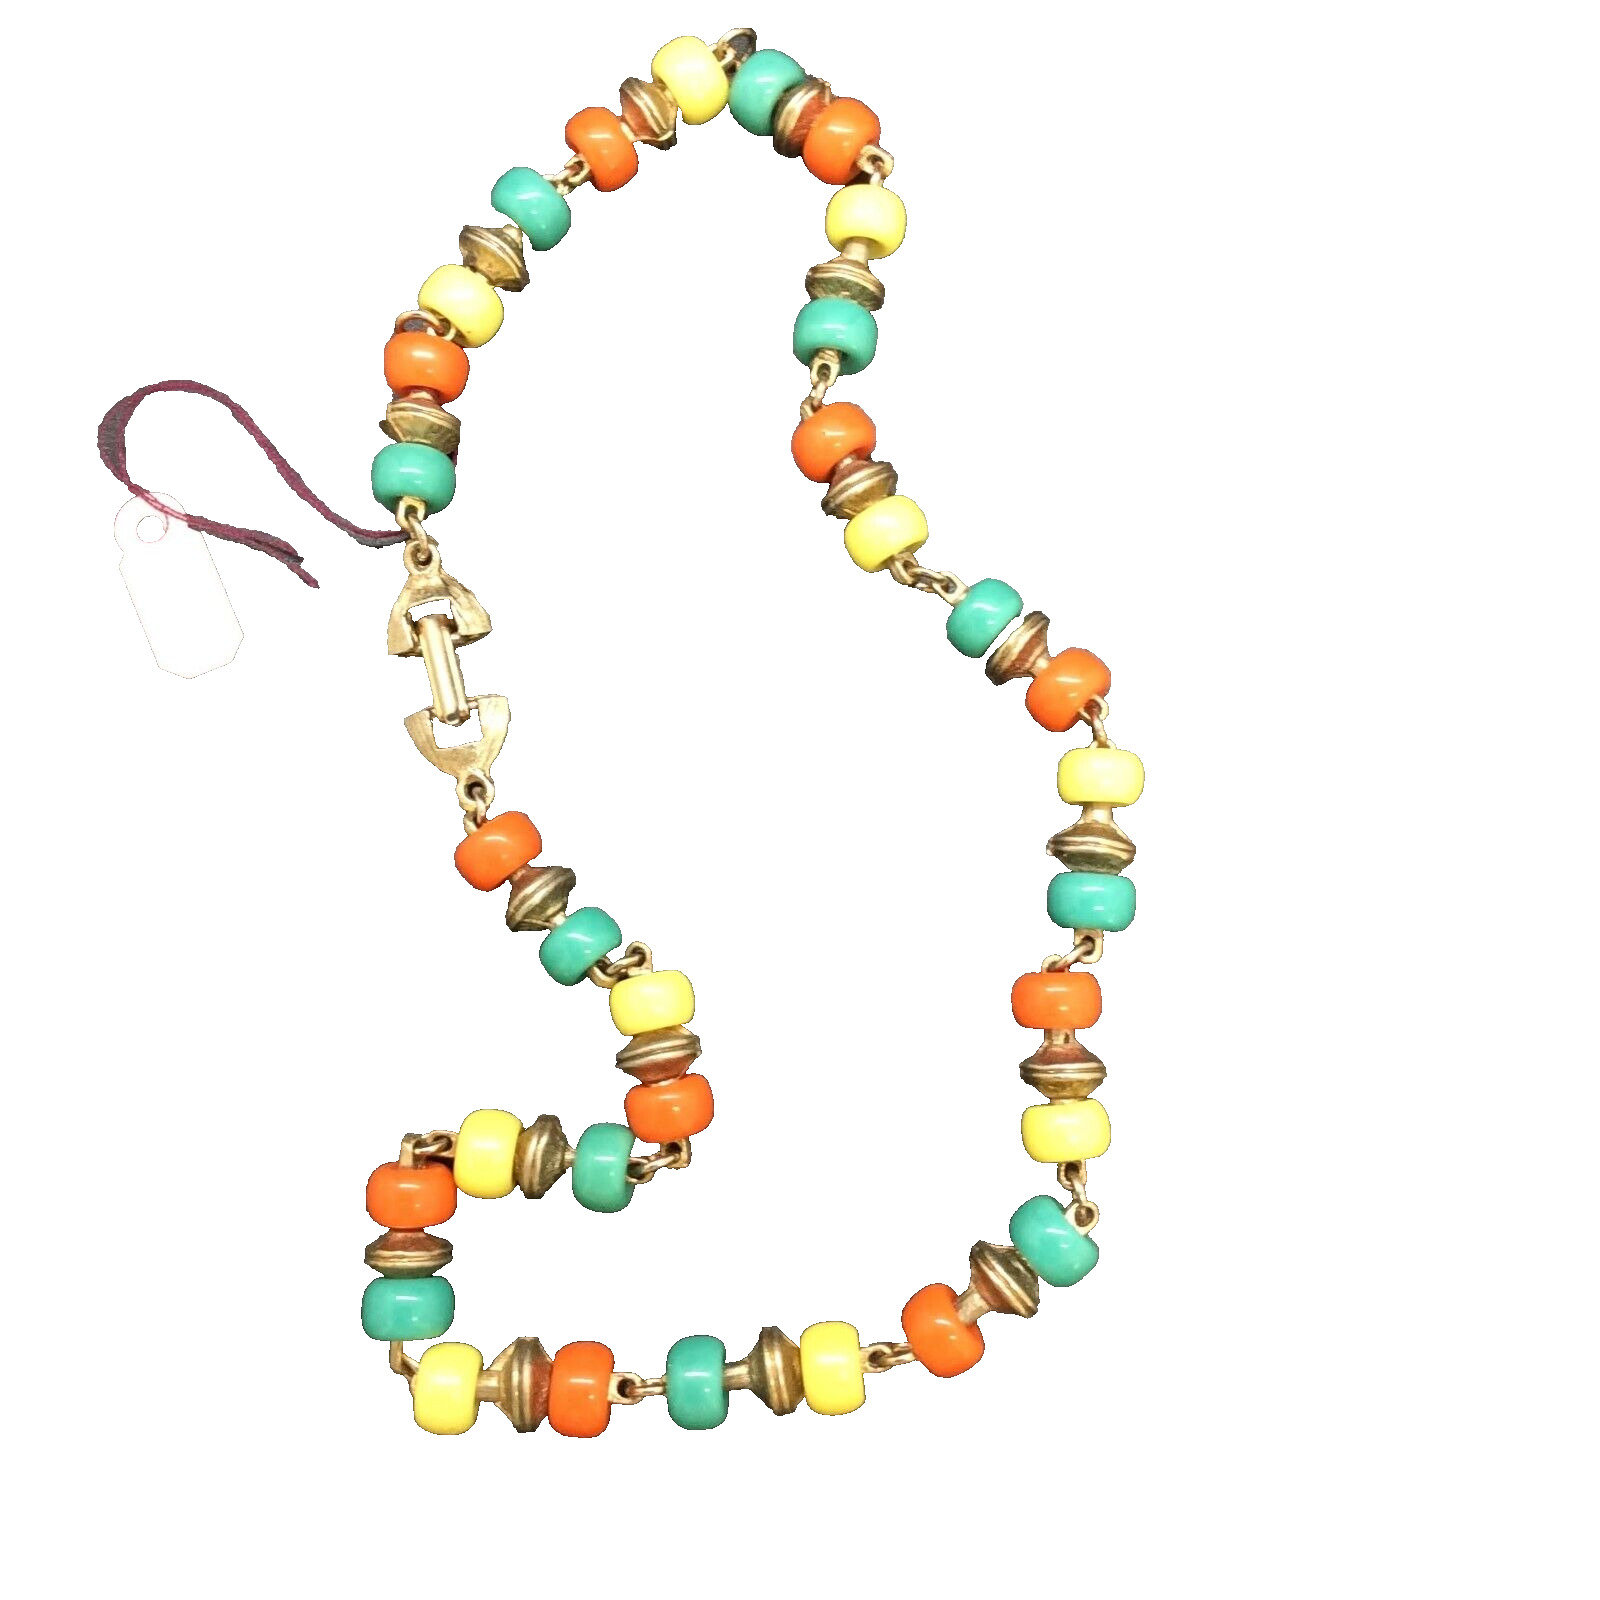 Vintage Multi-Colored Beaded Necklace - image 1